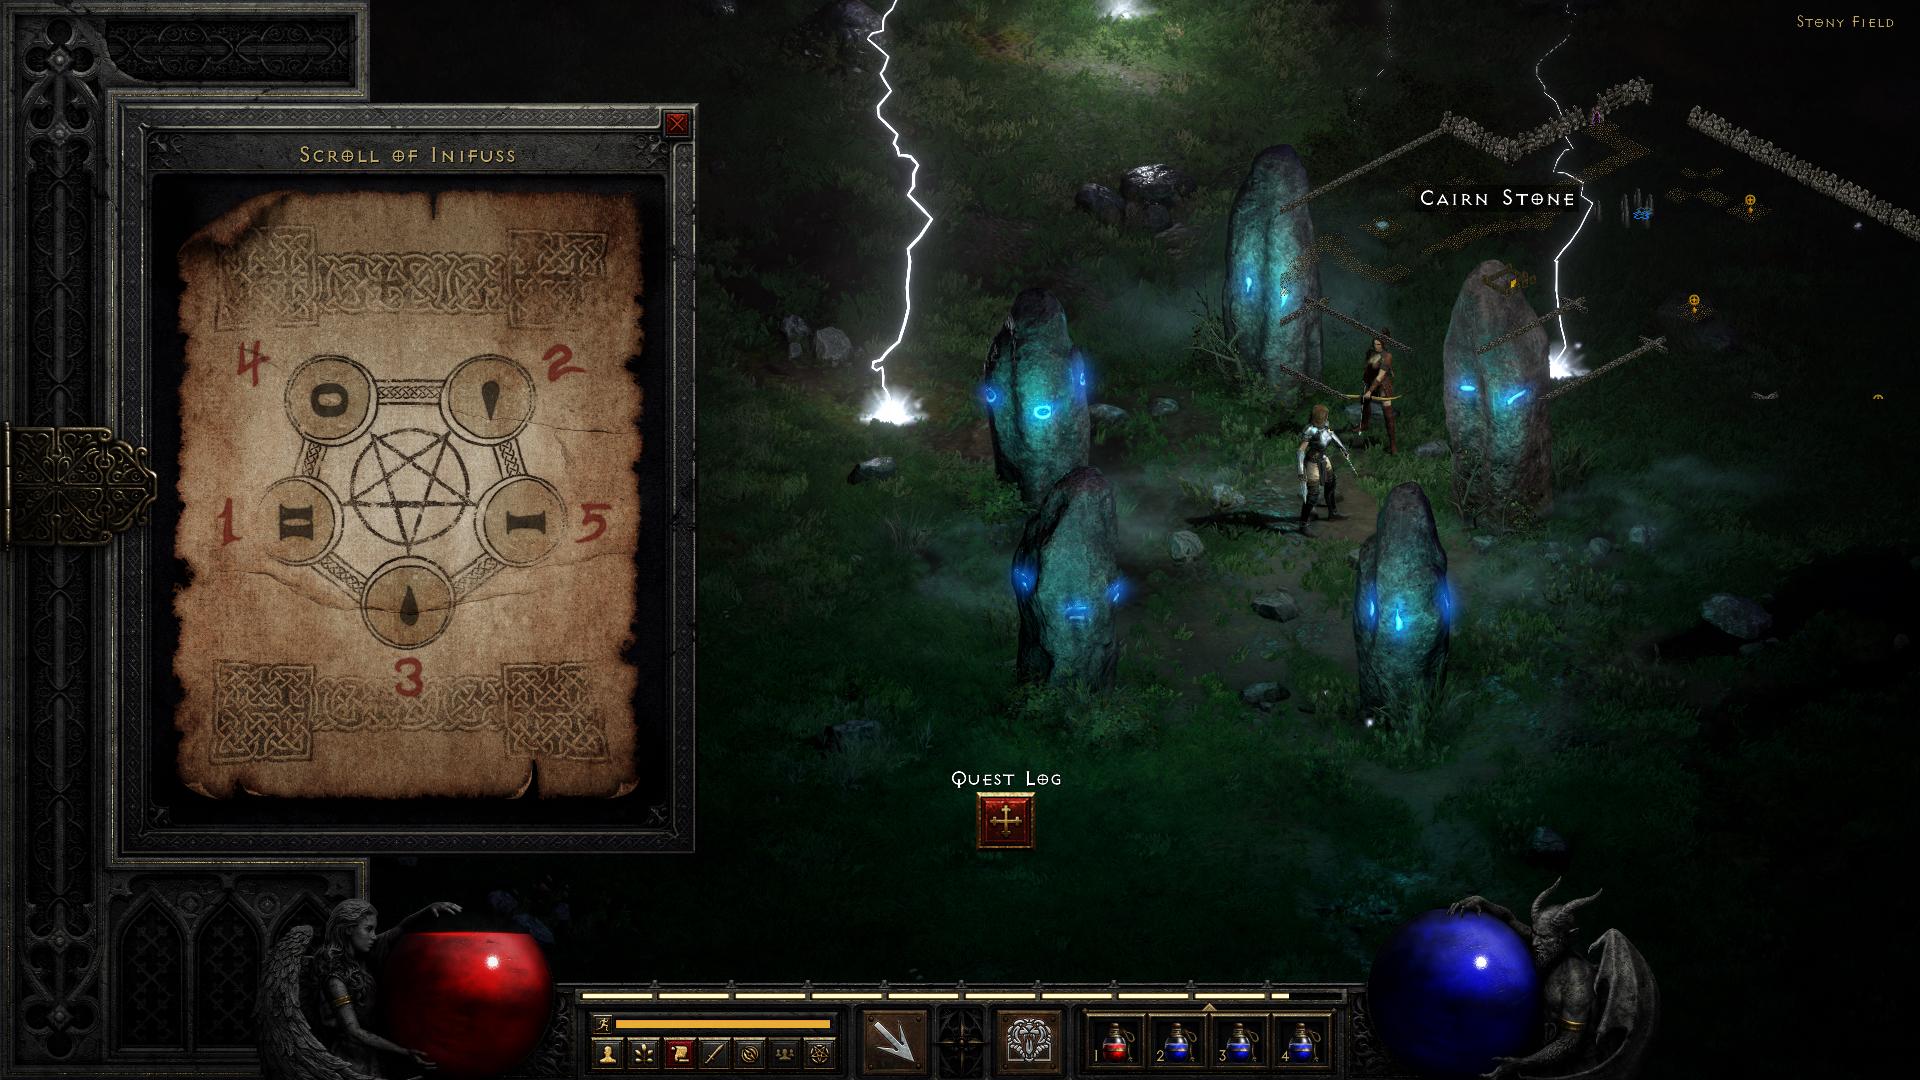 Diablo 2 Resurrected Cairn stones operating with scroll